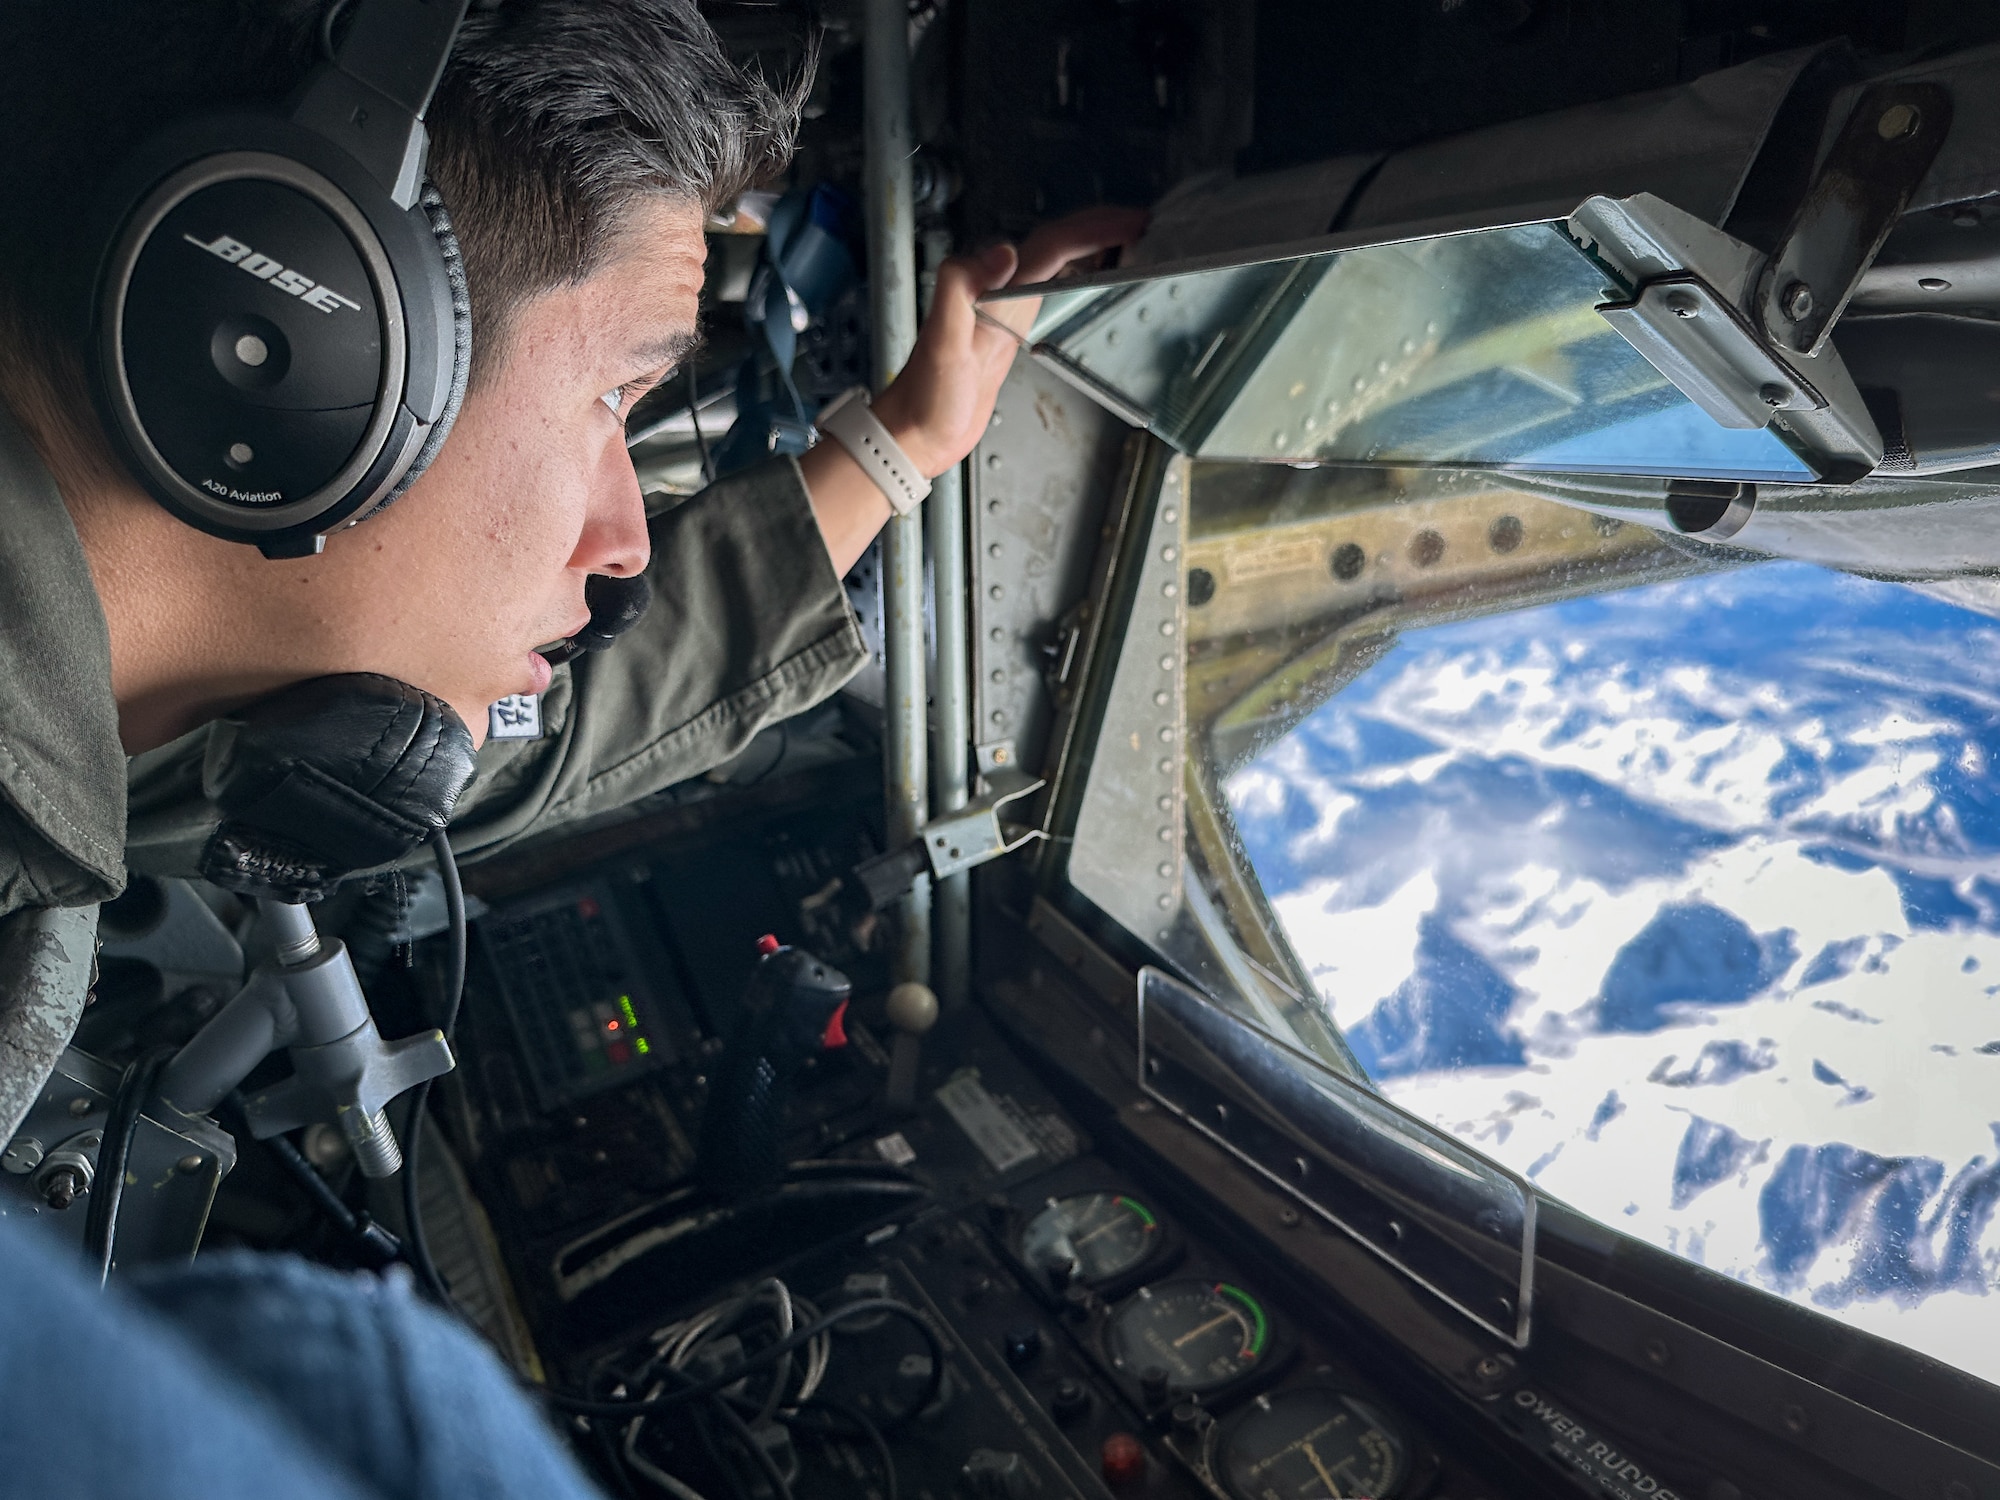 U.S. Air Force Airman 1st Class Joseph Saldana, a boom operator assigned to 50th Air Refueling Squadron, observes the Alaskan landscape during a refueling mission at Northern Edge 23-1 at Joint Base Elmendorf-Richardson, Alaska, May 18, 2023.